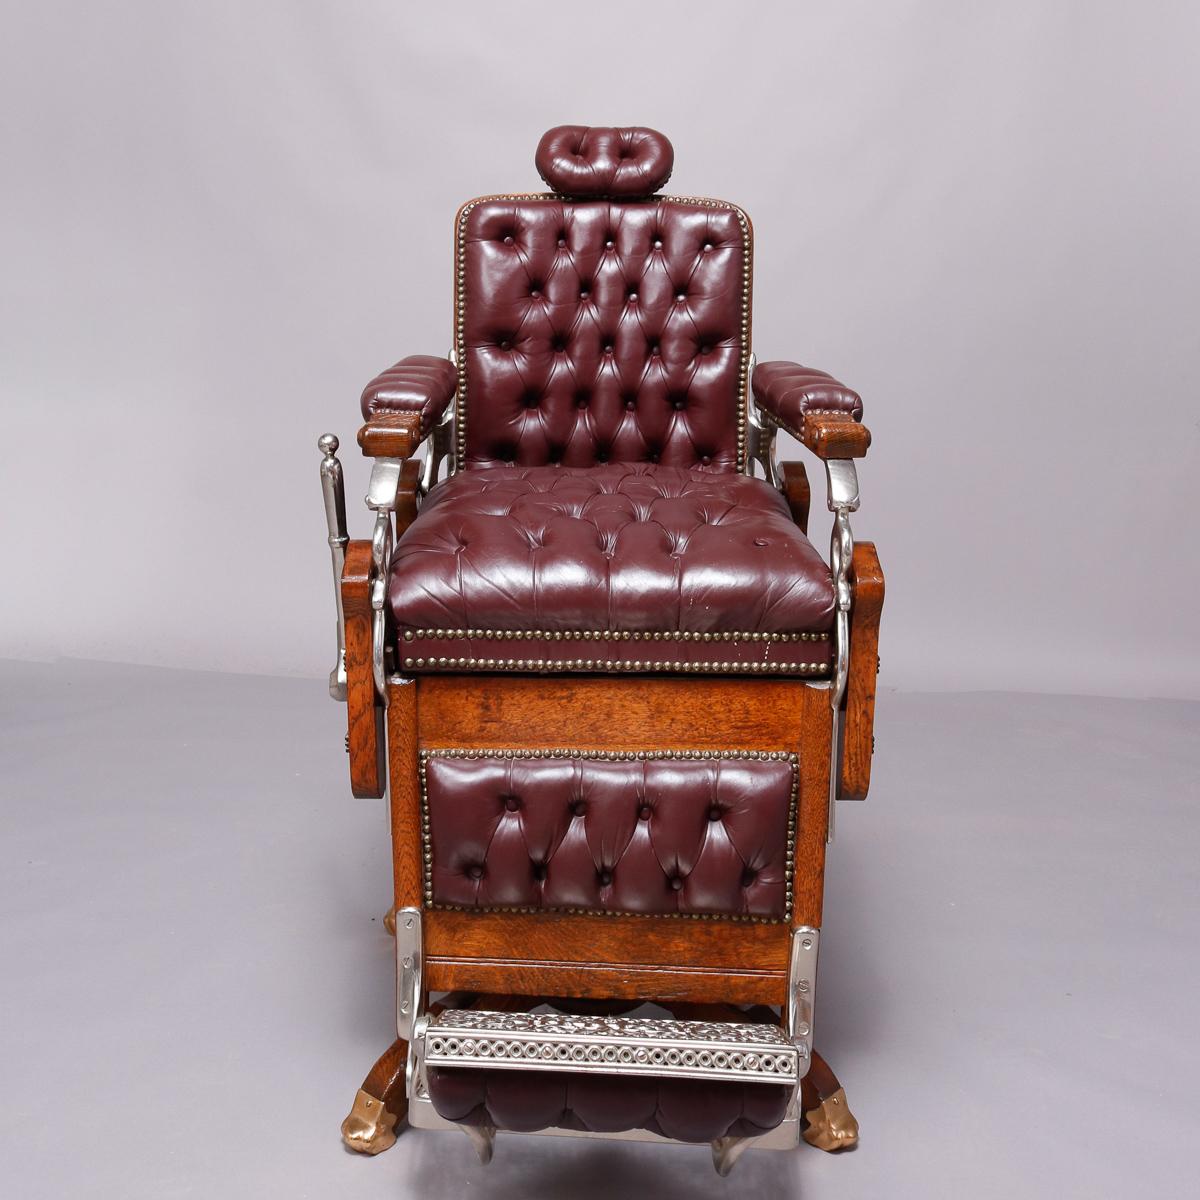 An antique and restored swivel, reclining and footed barber chair by Koken Barber Supply Co., St. Louis, MO offers quarter sawn oak frame having applied Fleur des Lis decoration with leather button back, seat, head and foot rests lined with brass